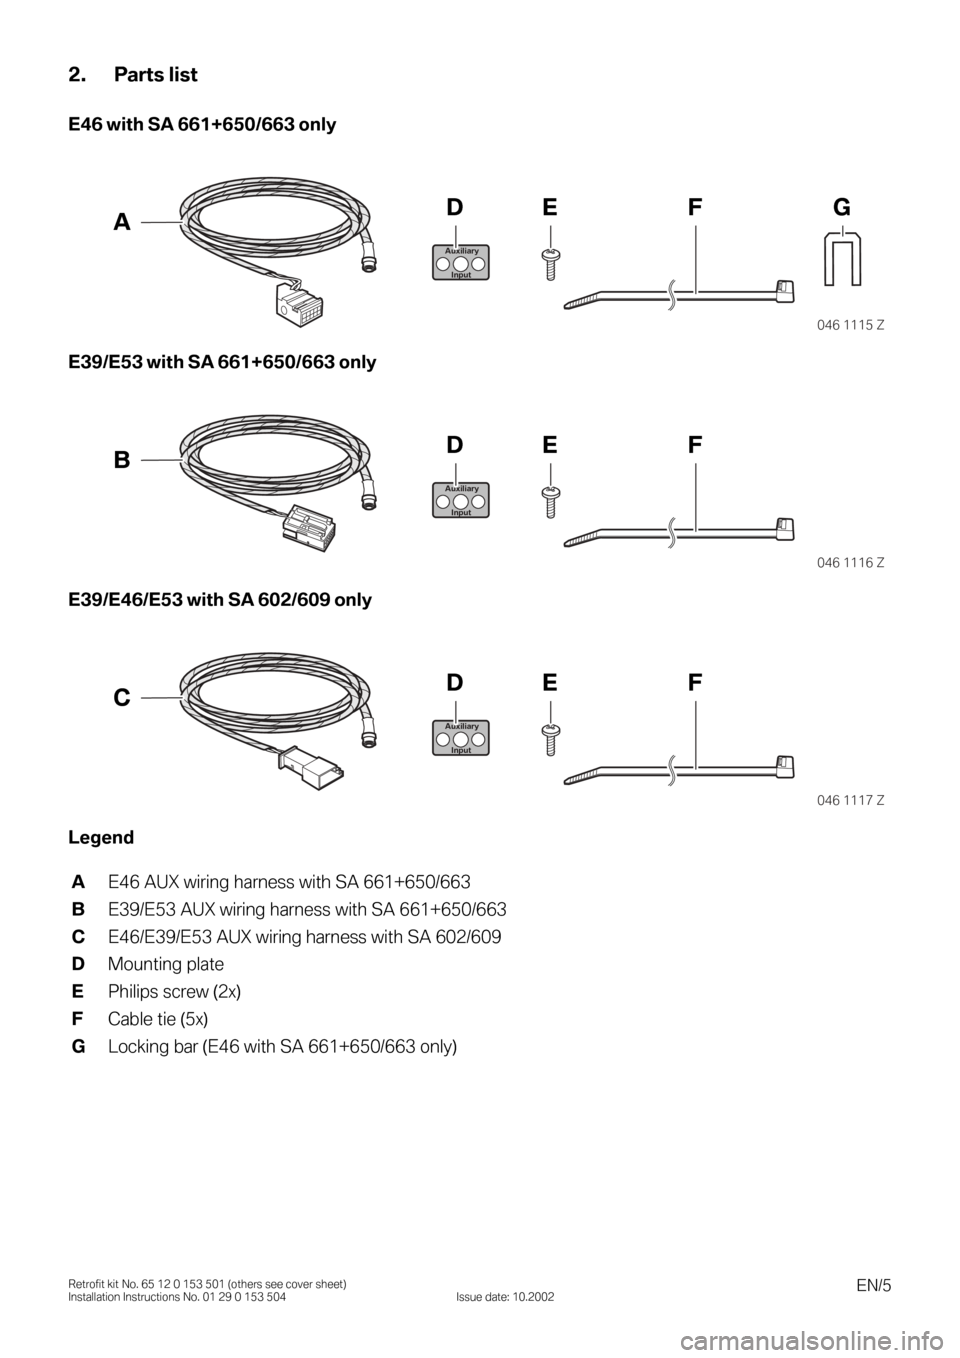 BMW X5 2005 E53 Auxilliary Connector Installation Instruction Manual EN/5Retrofit kit No. 65 12 0 153 501 (others see cover sheet)
Installation Instructions No. 01 29 0 153 504 Issue date: 10.2002
2. Parts list
E46 with SA 661+650/663 only
0
E39/E53 with SA 661+650/663